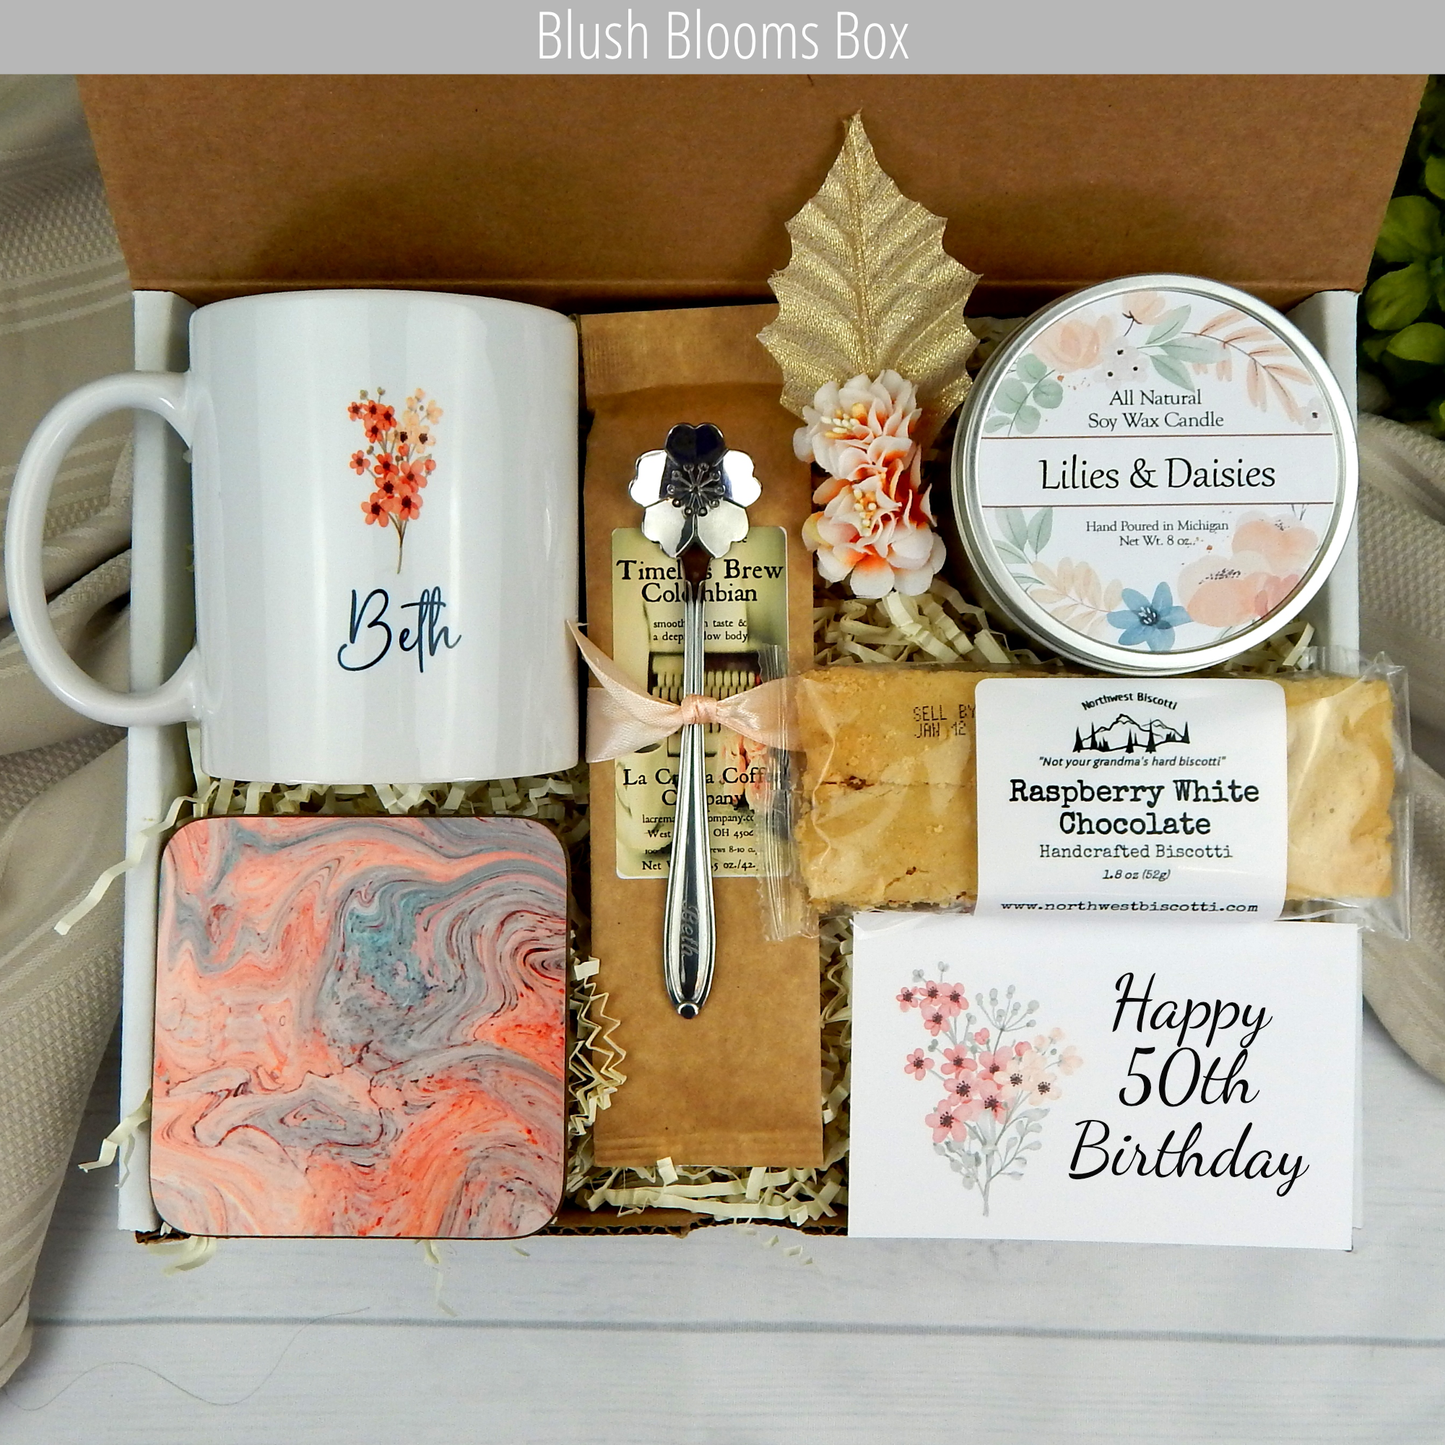 Warm wishes for 50: Birthday gift basket for her with a personalized name mug, coffee, and comforting goodies.